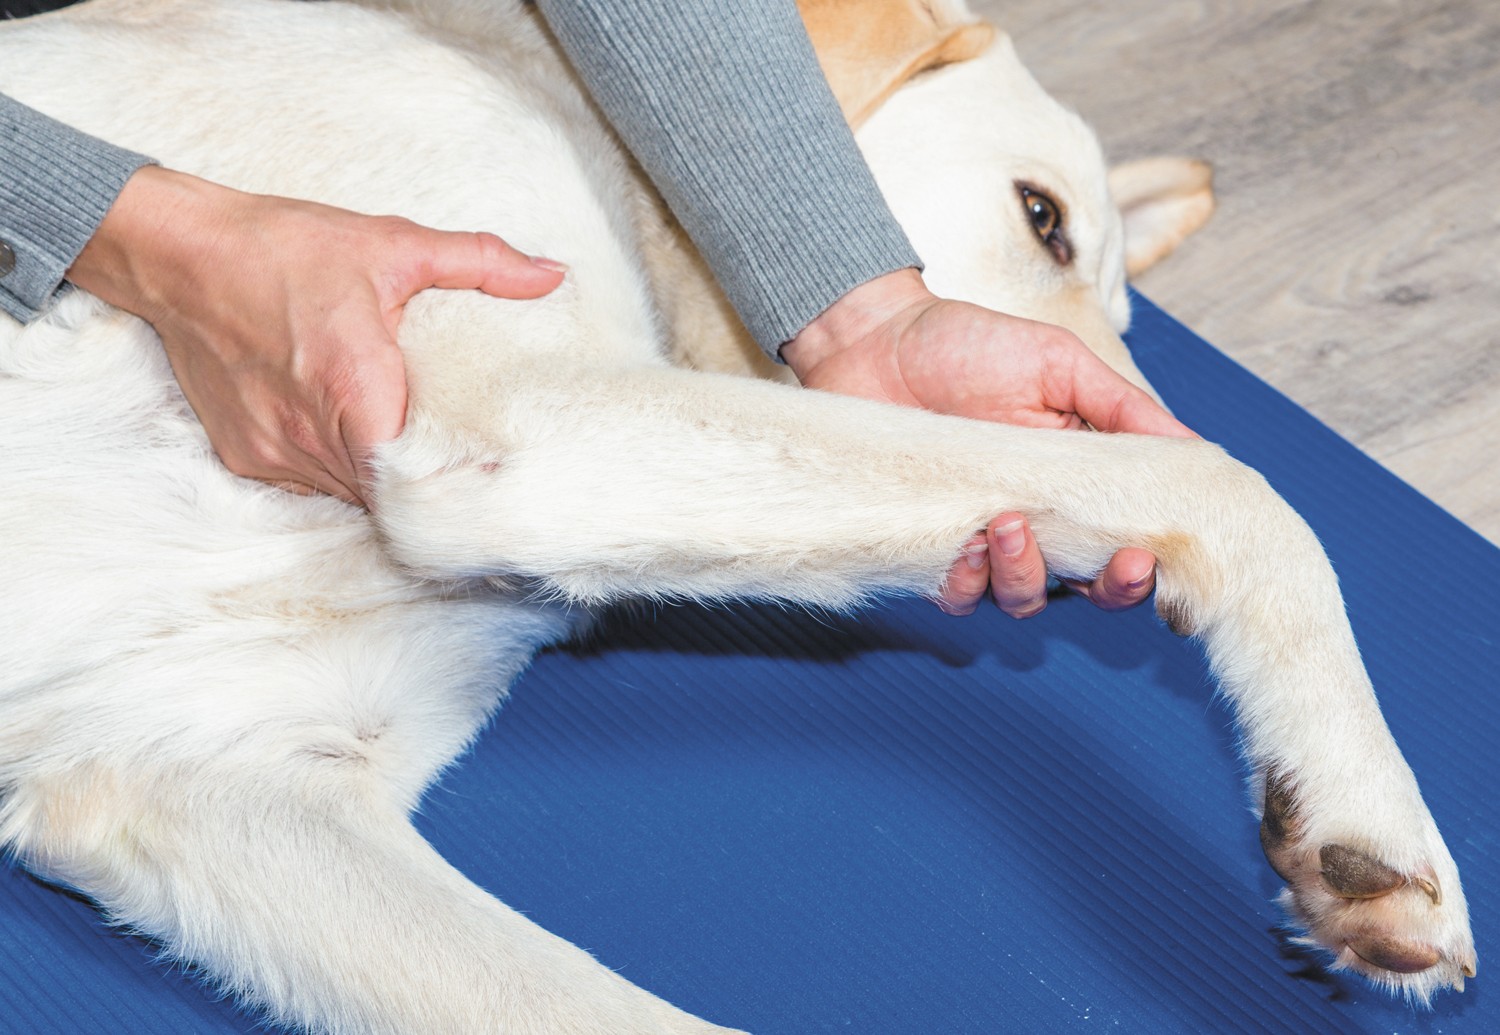 Telltale signs and how to manage joint pain in pets